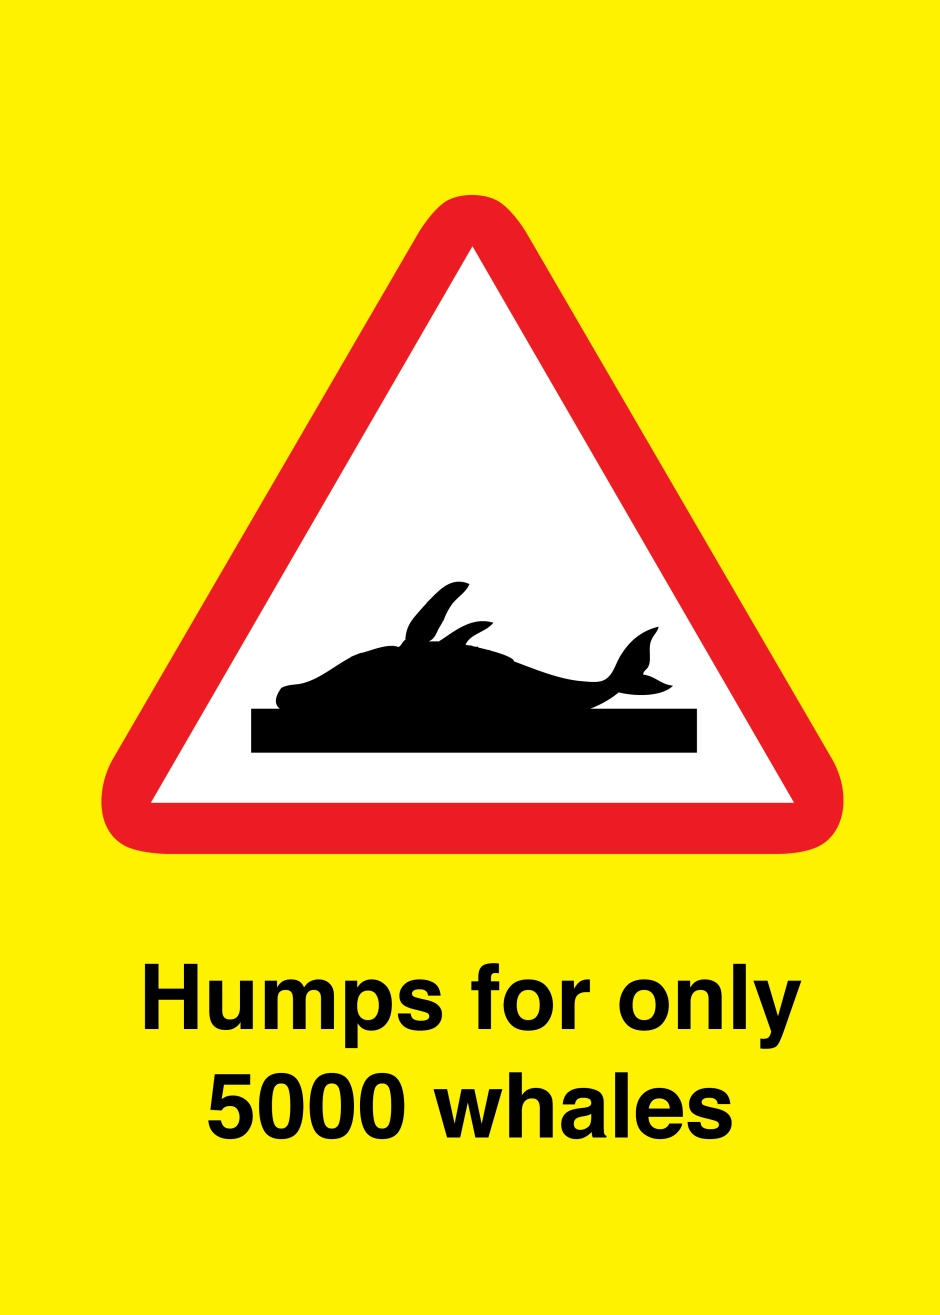 Humps for only 5000 whales